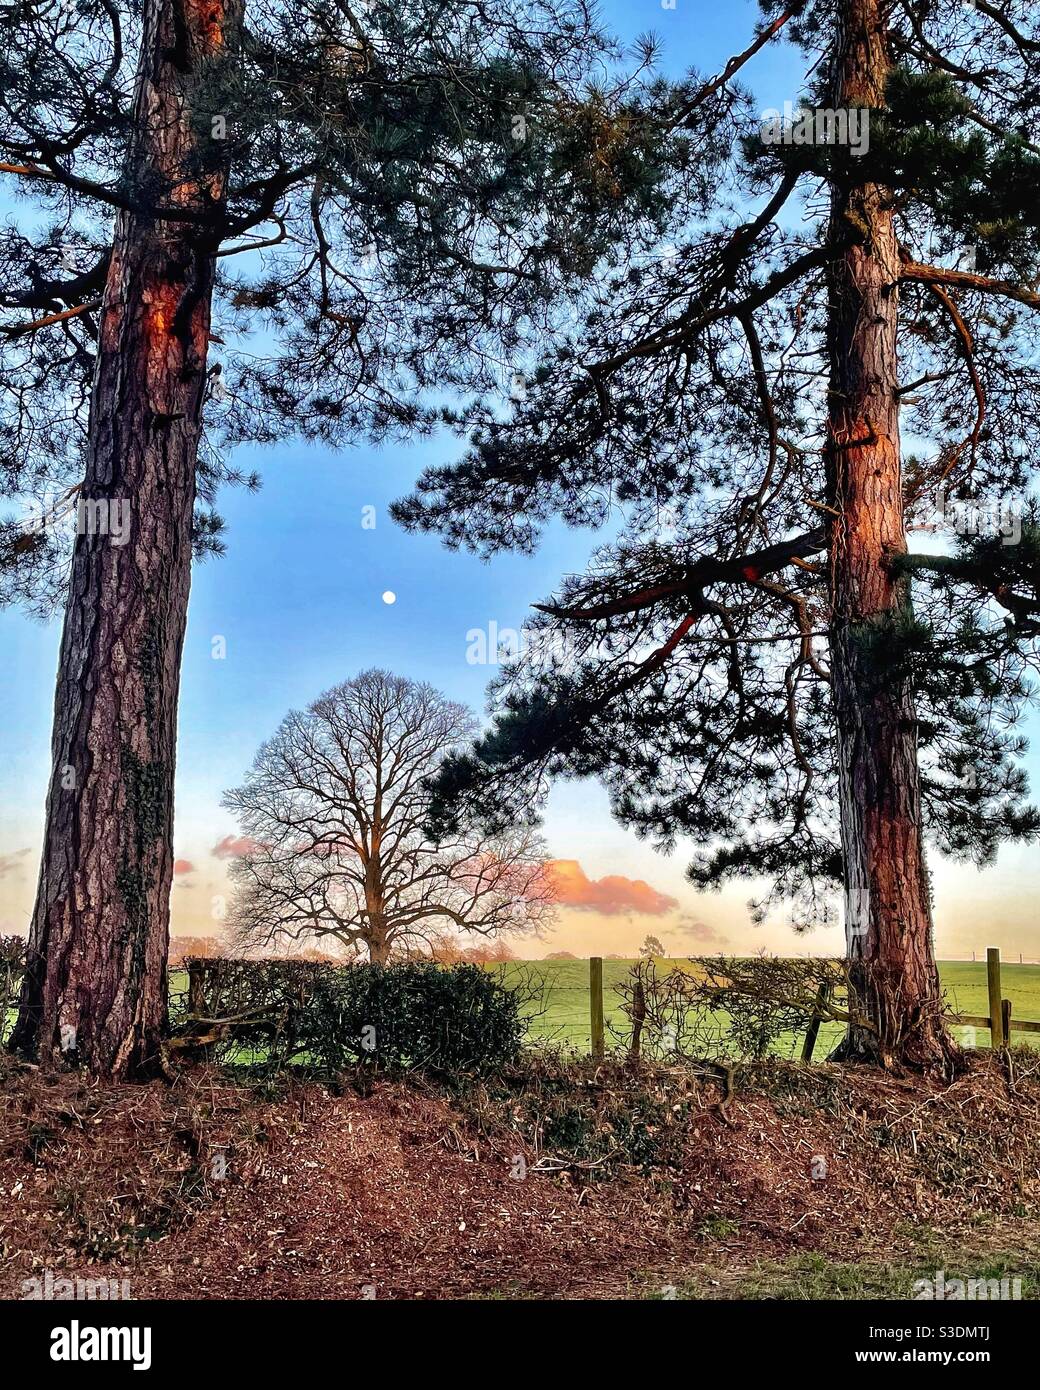 Moon appearing in the late afternoon surrounded by trees. Stock Photo